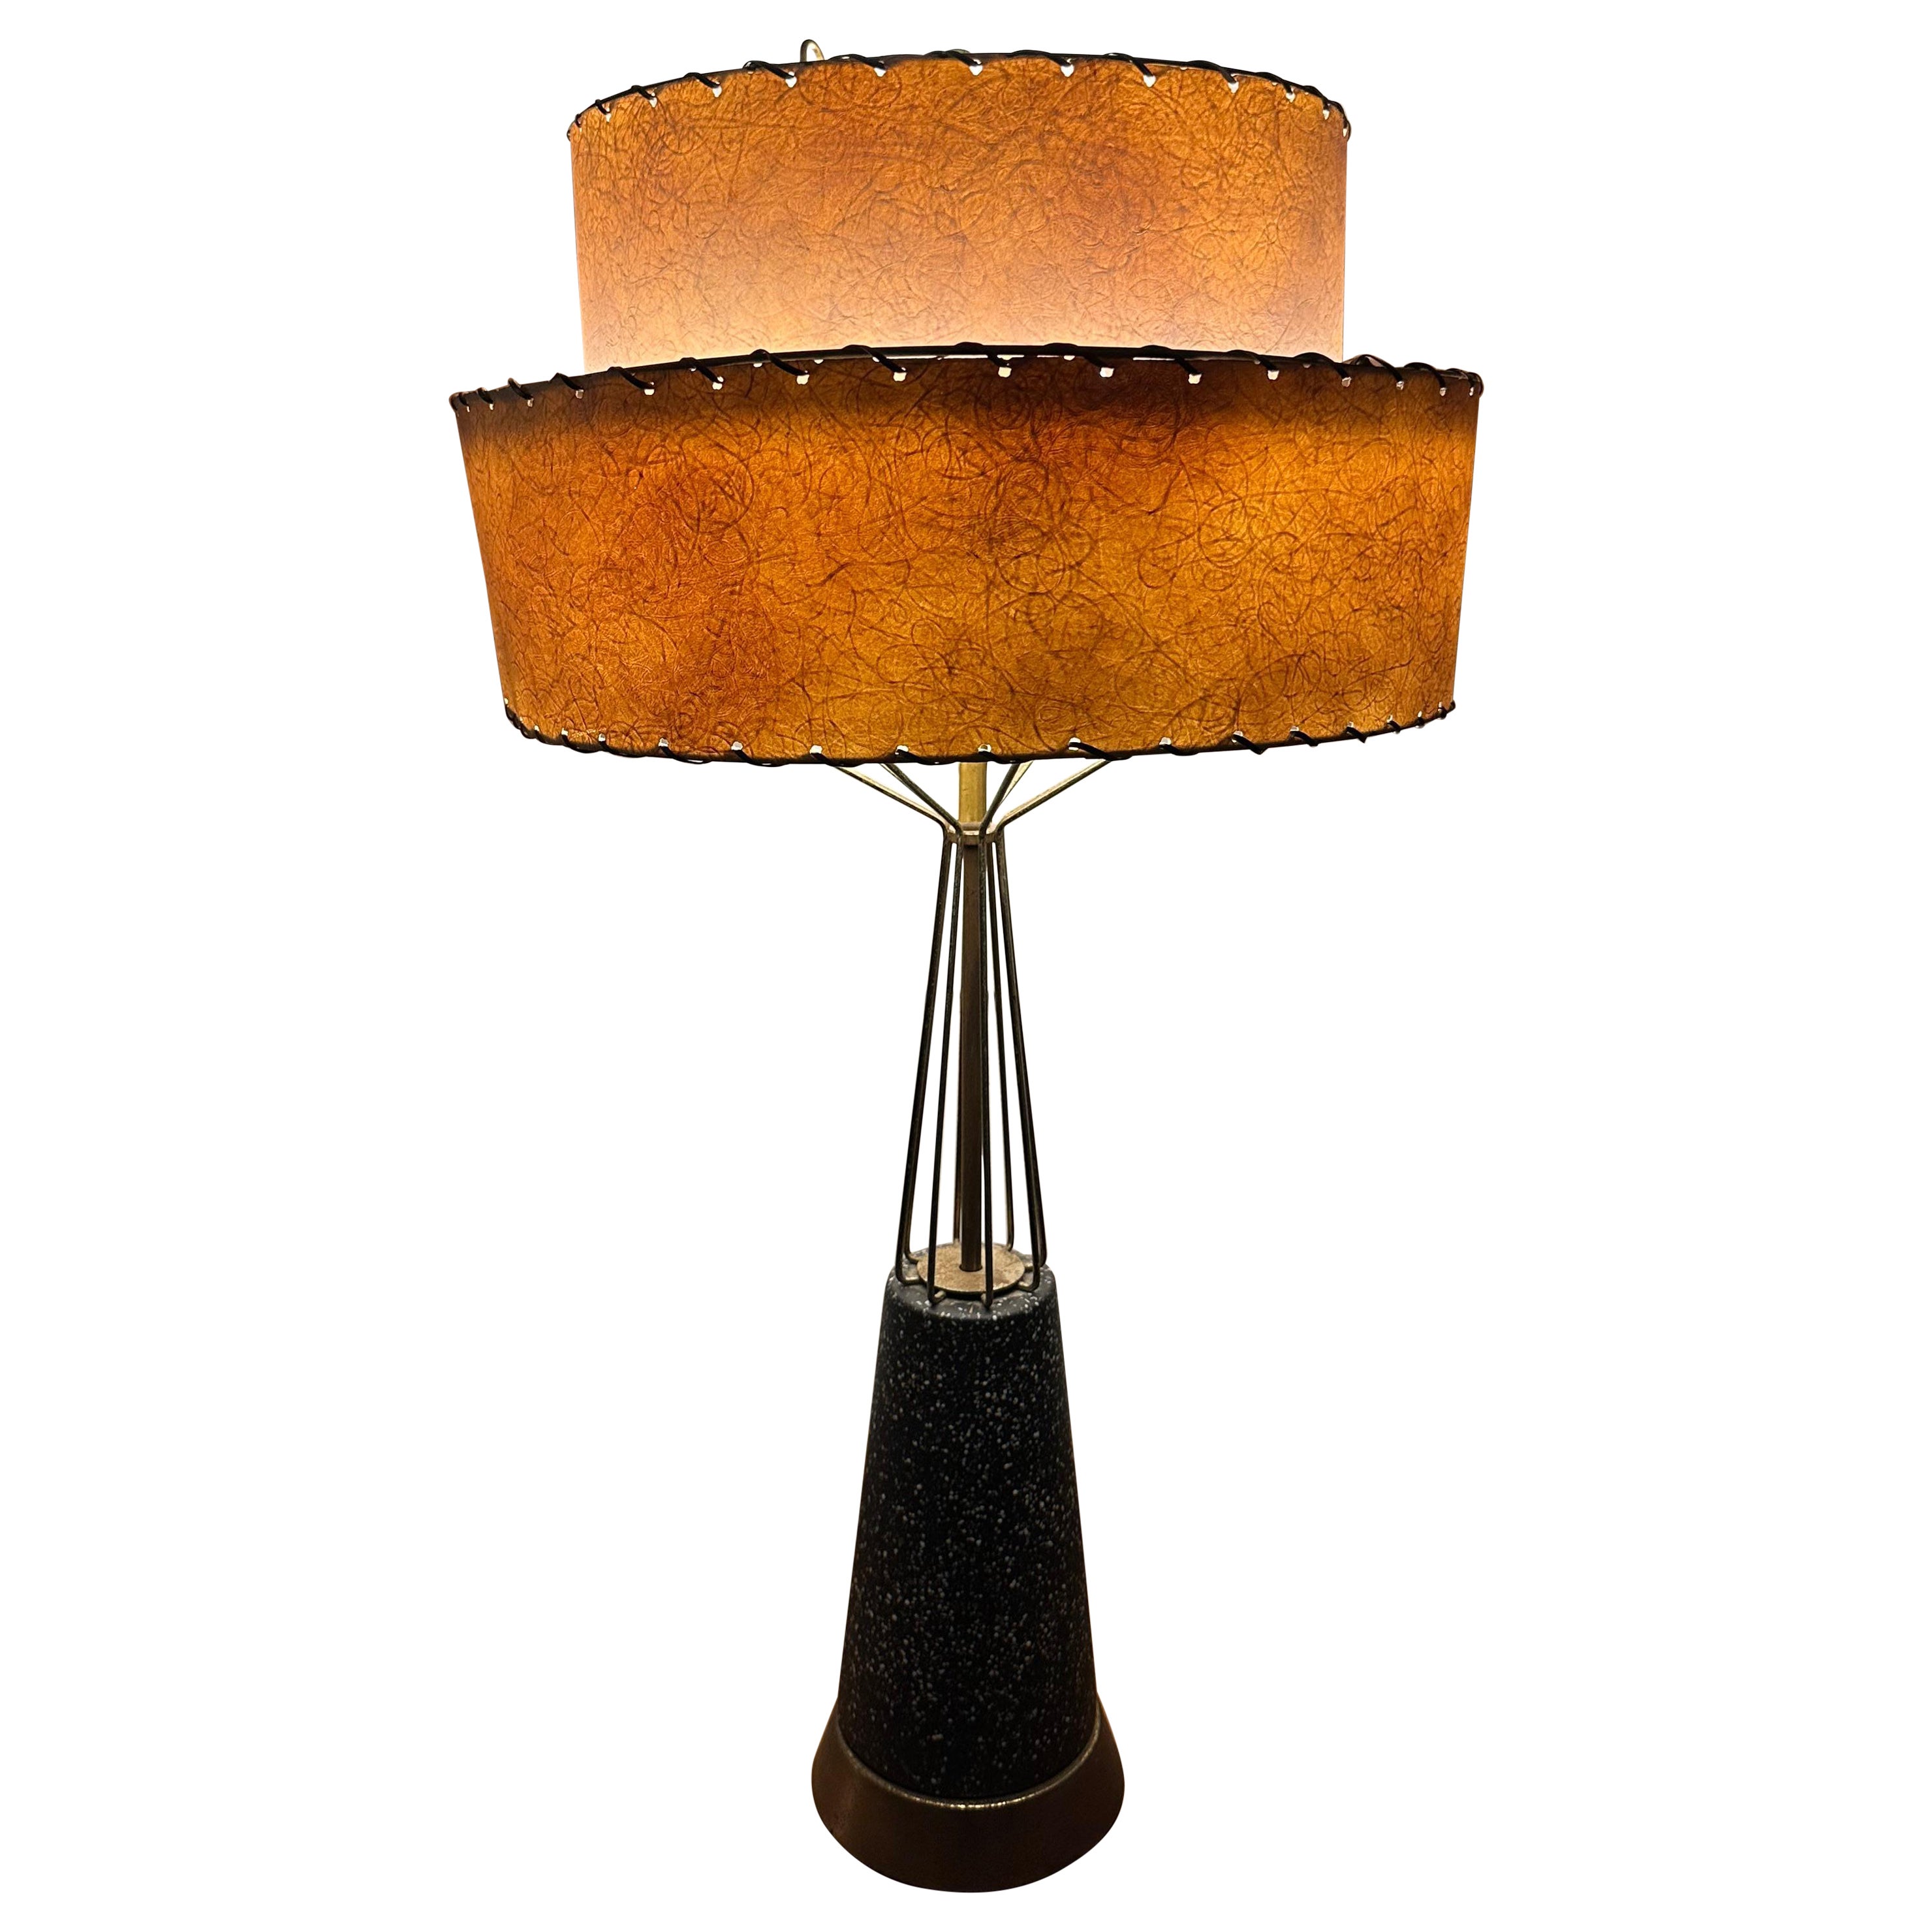 Mesmerizing Unique Mid-Century Modern Tall Table Lamp For Sale